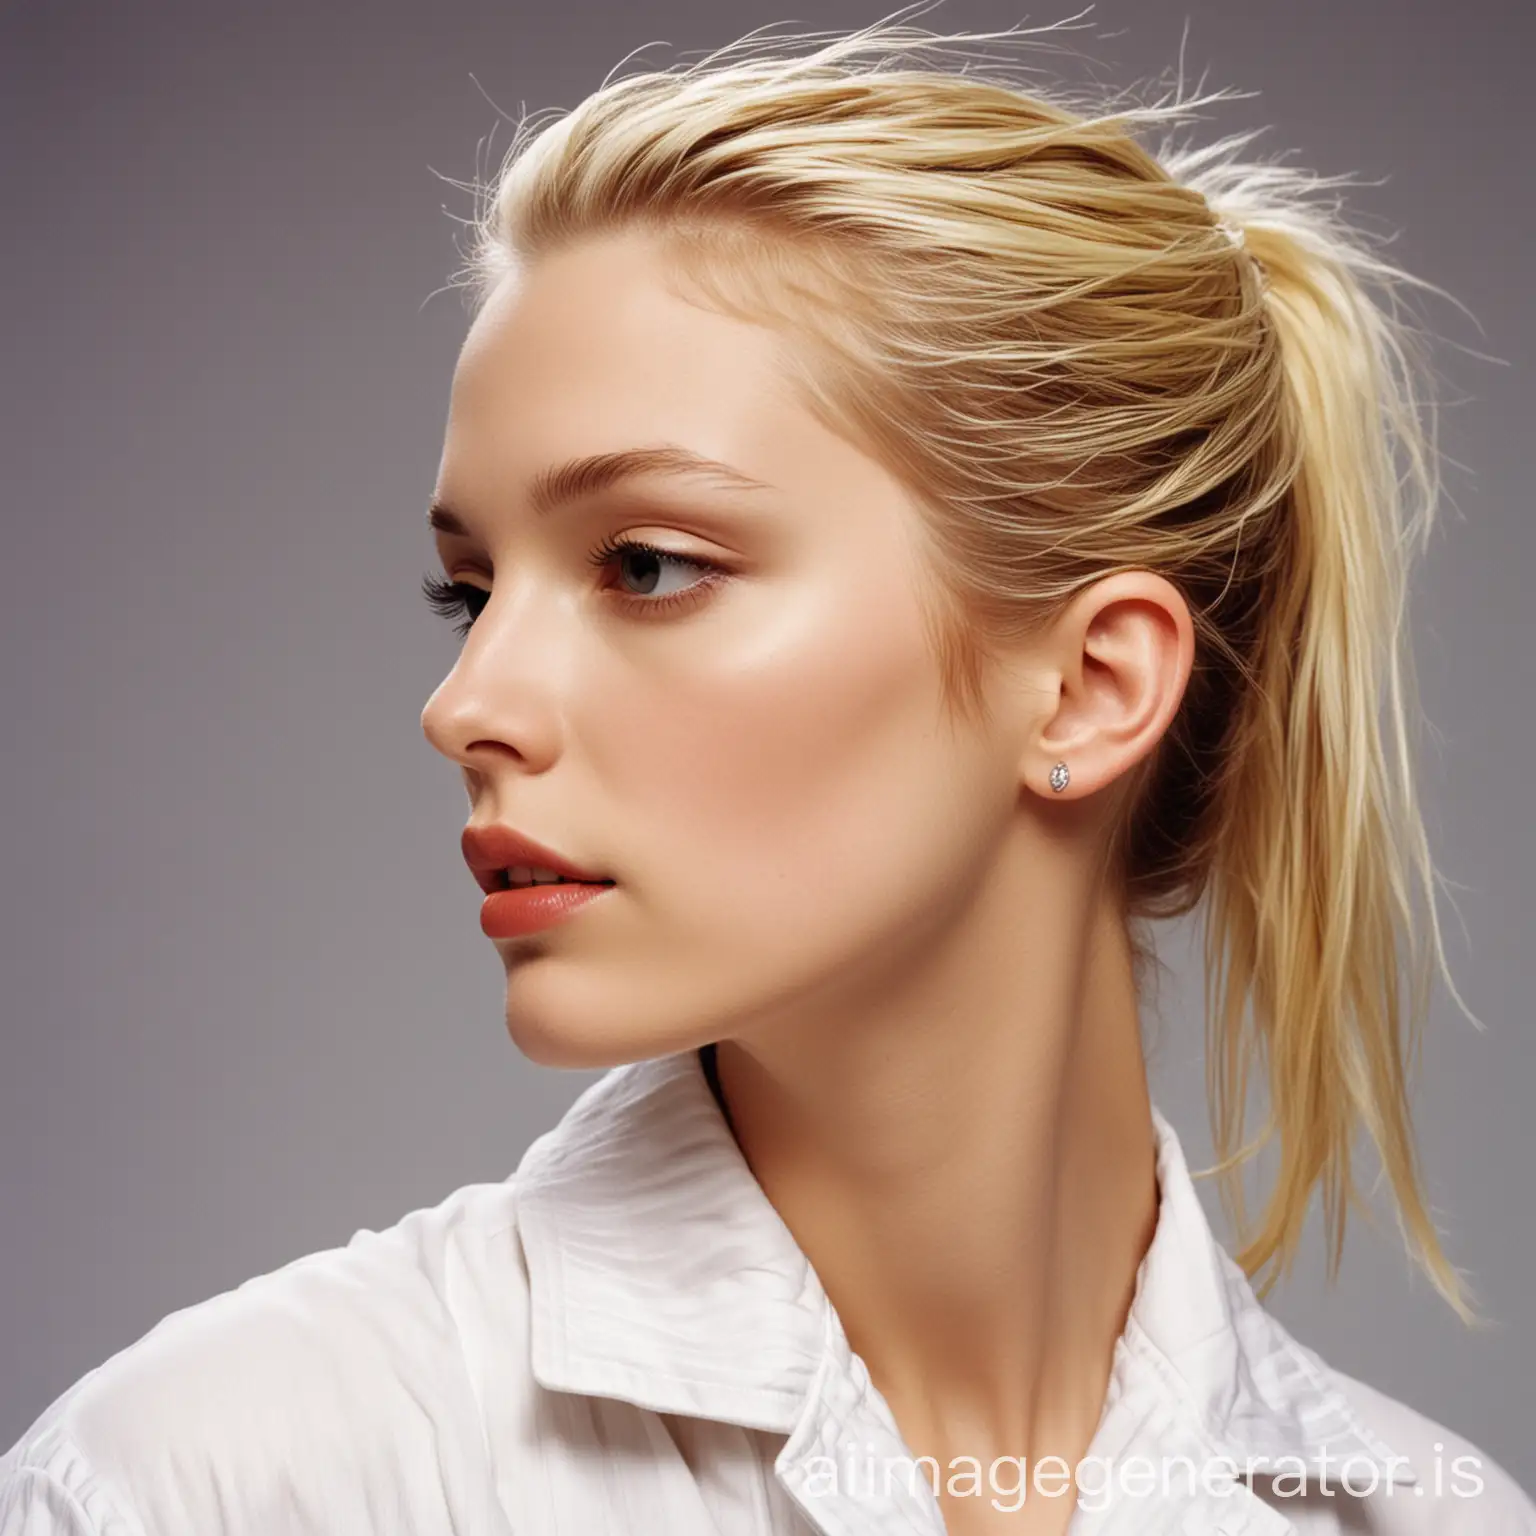 Side profile of white female model in 2000's clothing